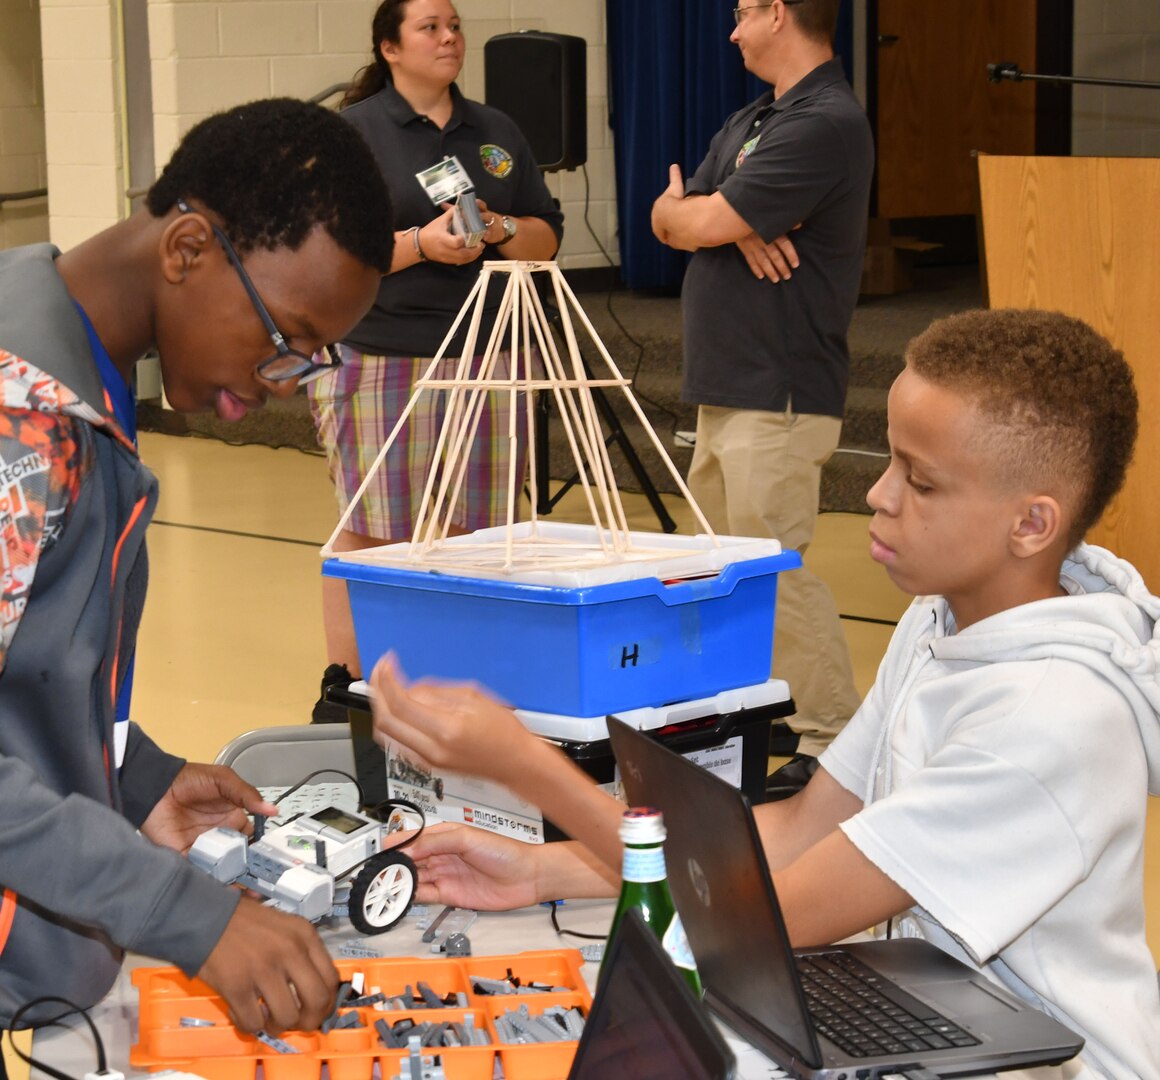 IMAGE: KING GEORGE. Va. (June 26, 2019) - Middle school students build a robot at the 2019 Naval Surface Warfare Center Dahlgren Division (NSWCDD)-sponsored Navy science, technology, engineering, and mathematics (STEM) Summer Academy, held June 24-28. They are among 70 middle school students who are developing their teamwork and problem-solving skills in math and science while partnering with a teacher and an NSWCDD scientist or engineer. The STEM Summer ‘campers’ will deploy the robots they design, build, and program to respond to 10 missions - including the delivery of humanitarian aid, rotating troops and transporting an electromagnetic railgun to the deck of a Navy ship – by the end of the week-long academy.